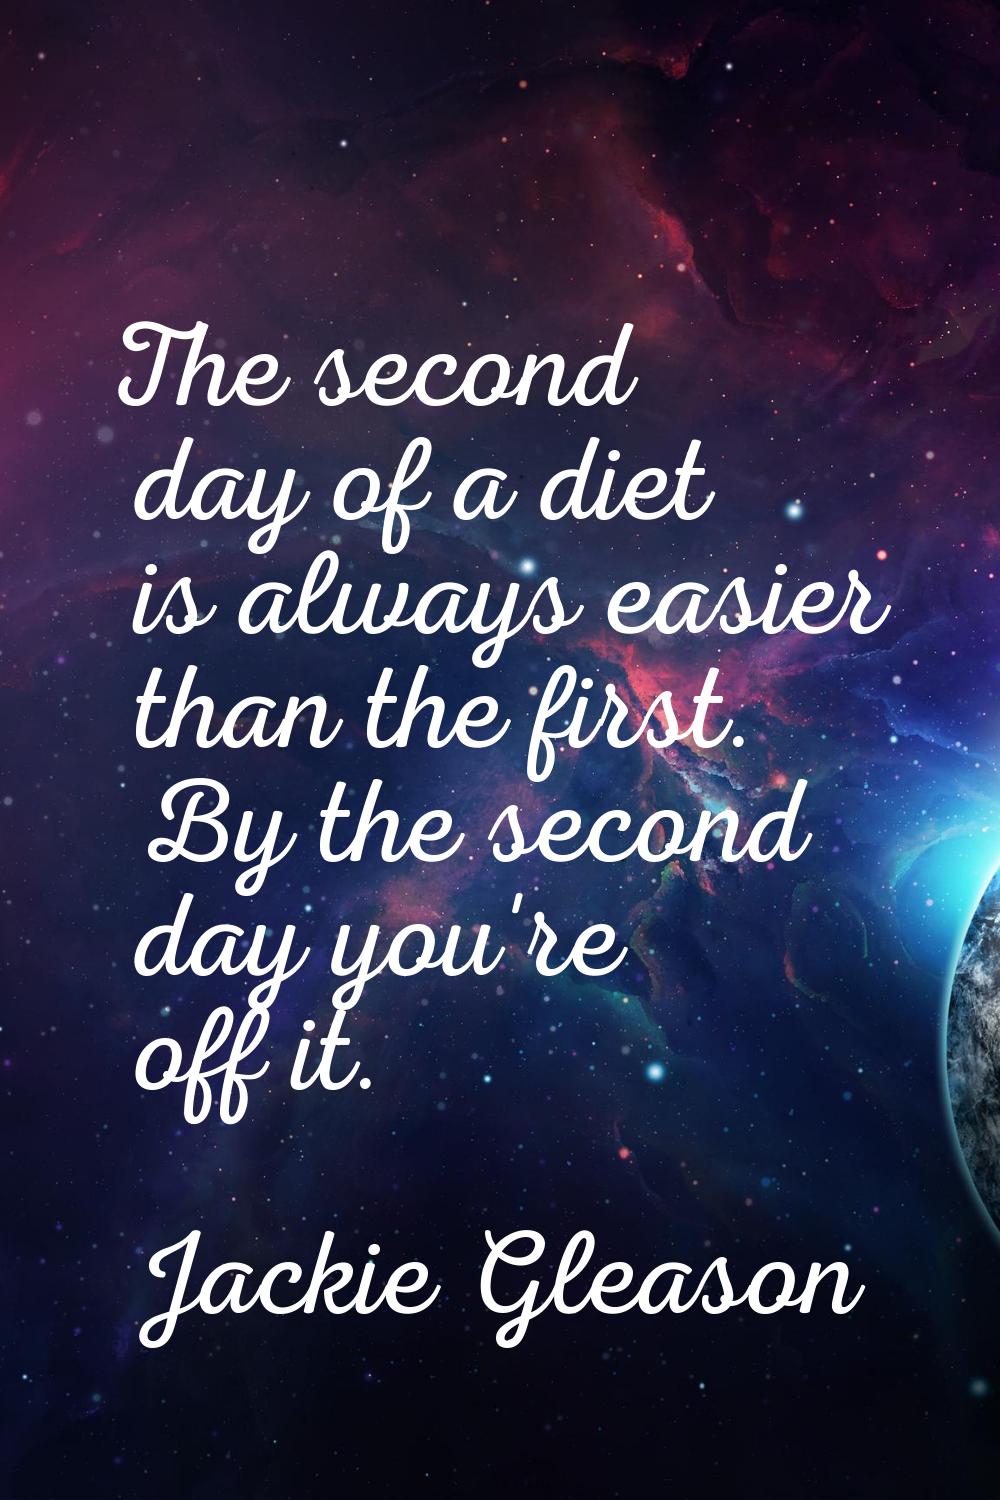 The second day of a diet is always easier than the first. By the second day you're off it.